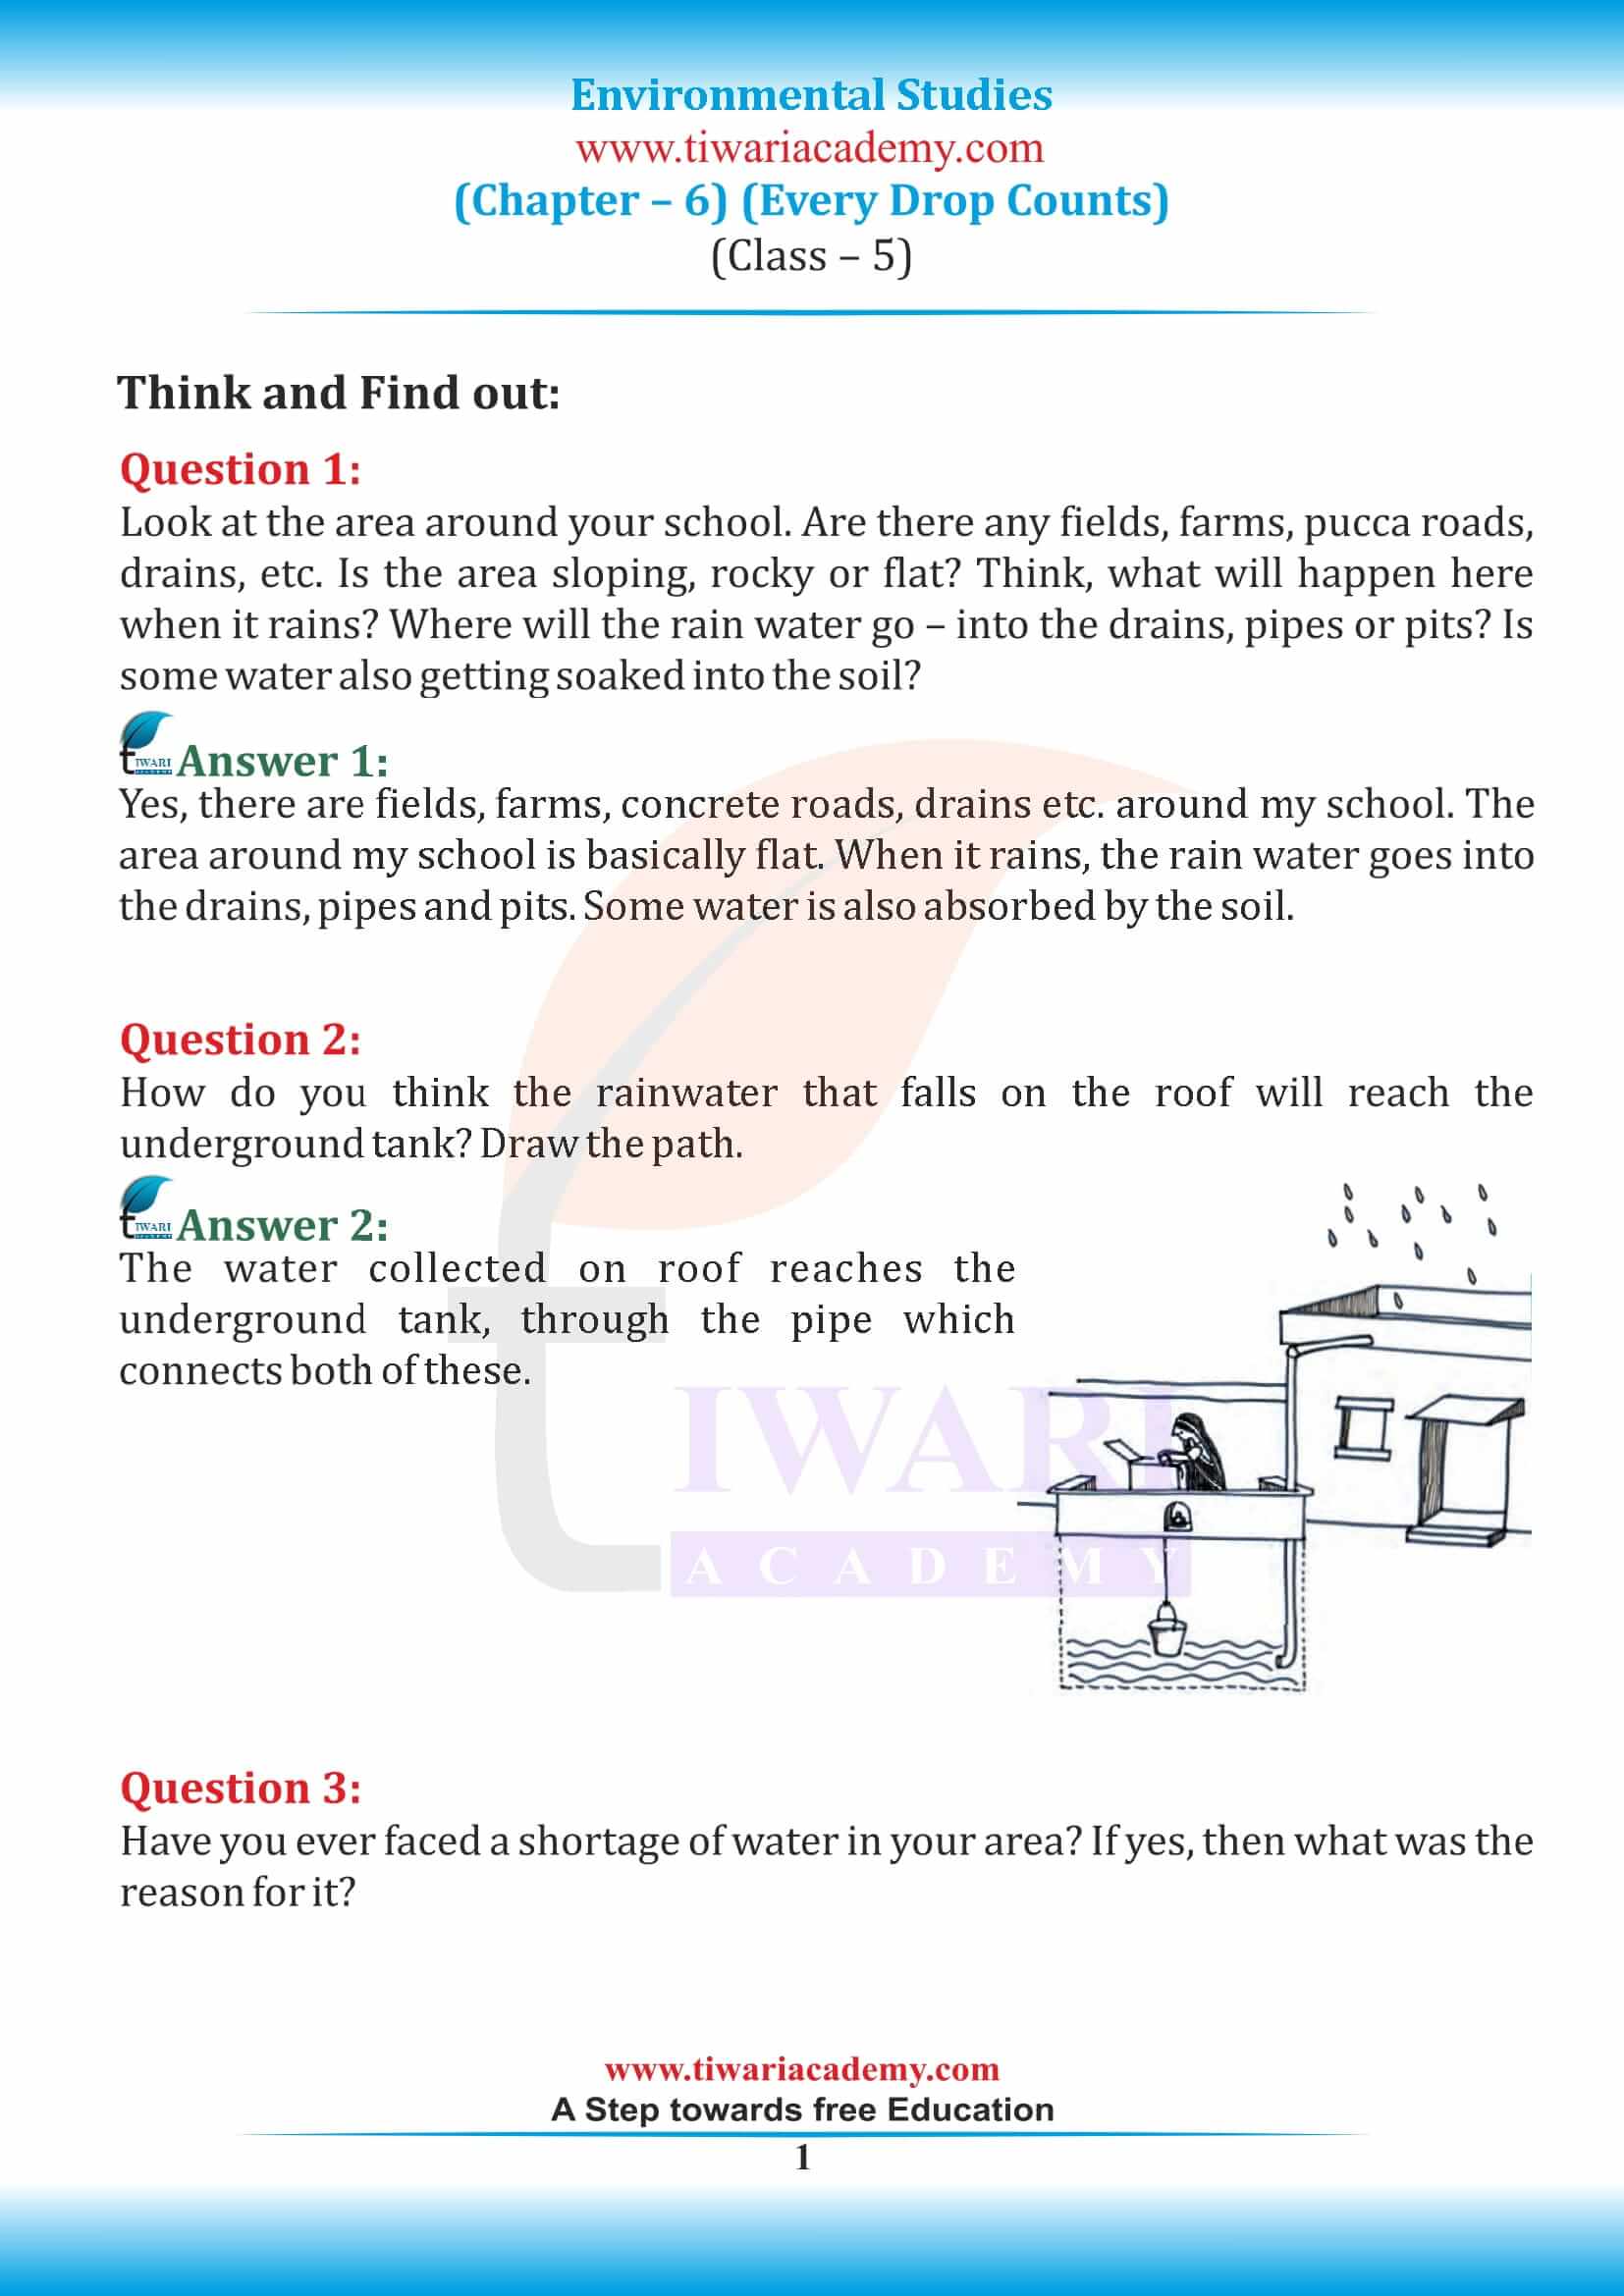 NCERT Solutions for Class 5 EVS Chapter 6 Every Drop Counts